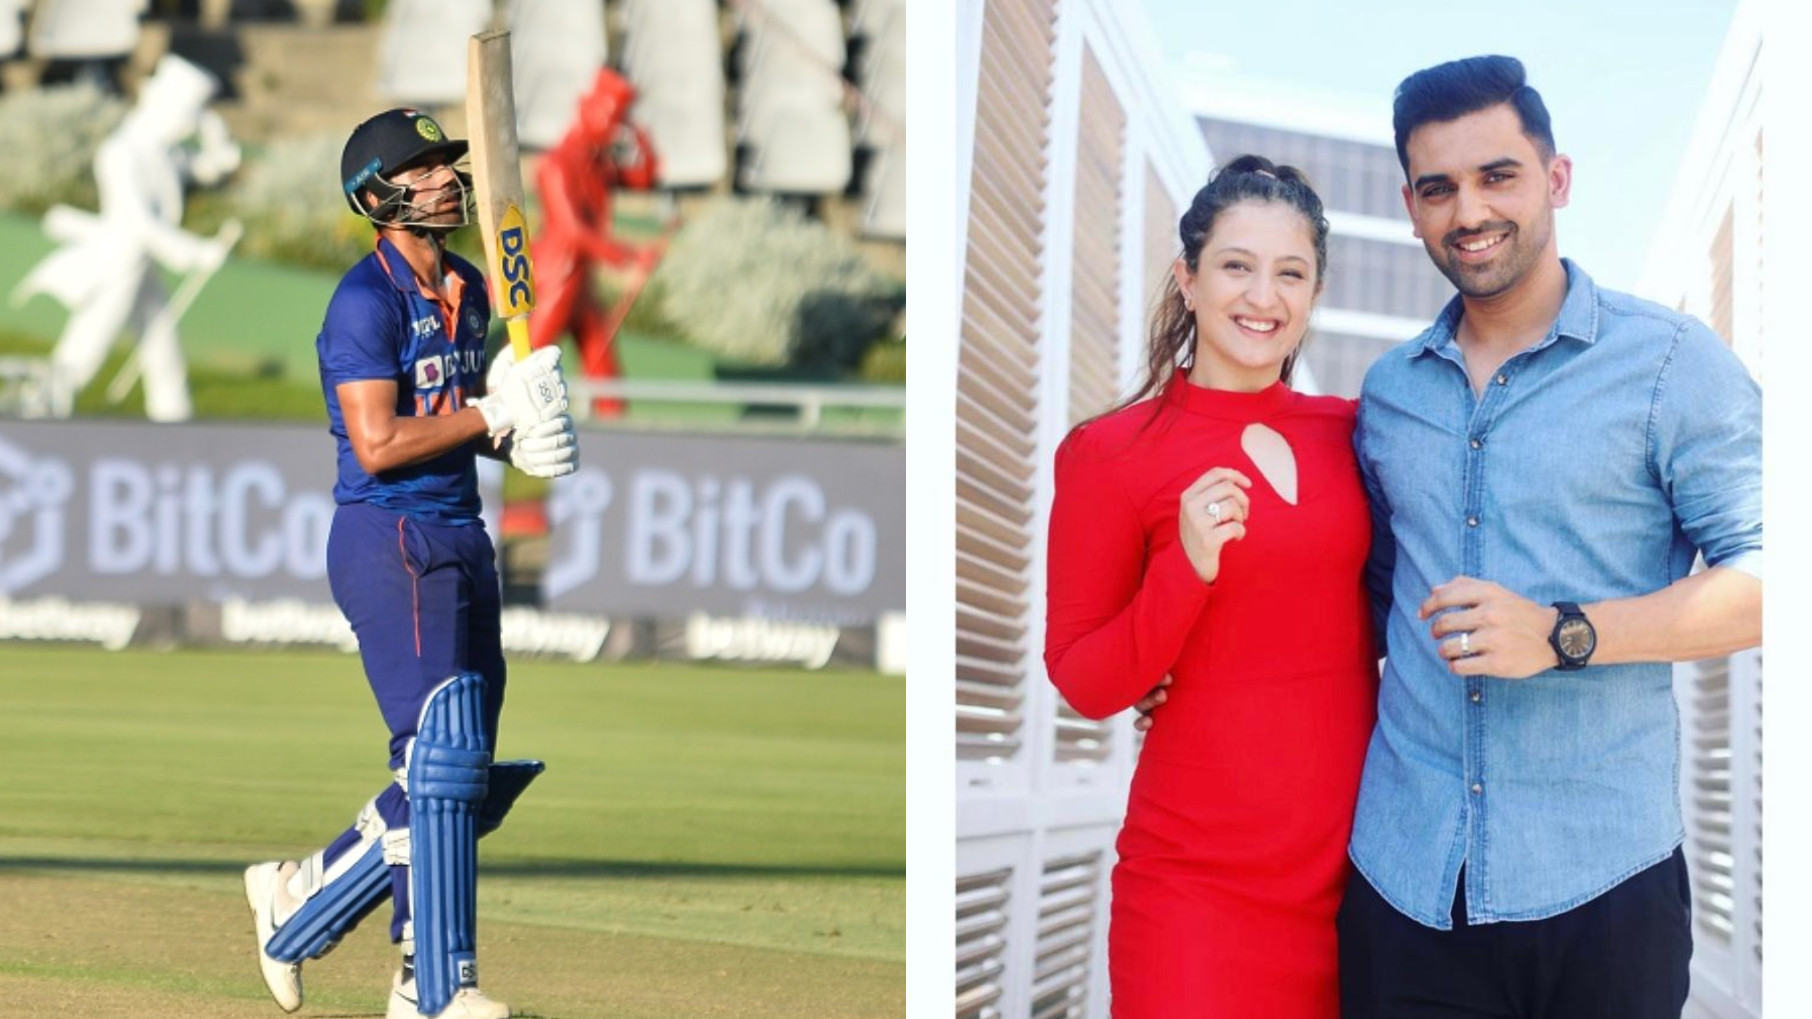 SA v IND 2021-22: Deepak Chahar’s fiancee shares an appreciation post after India pacer's stellar display in 3rd ODI